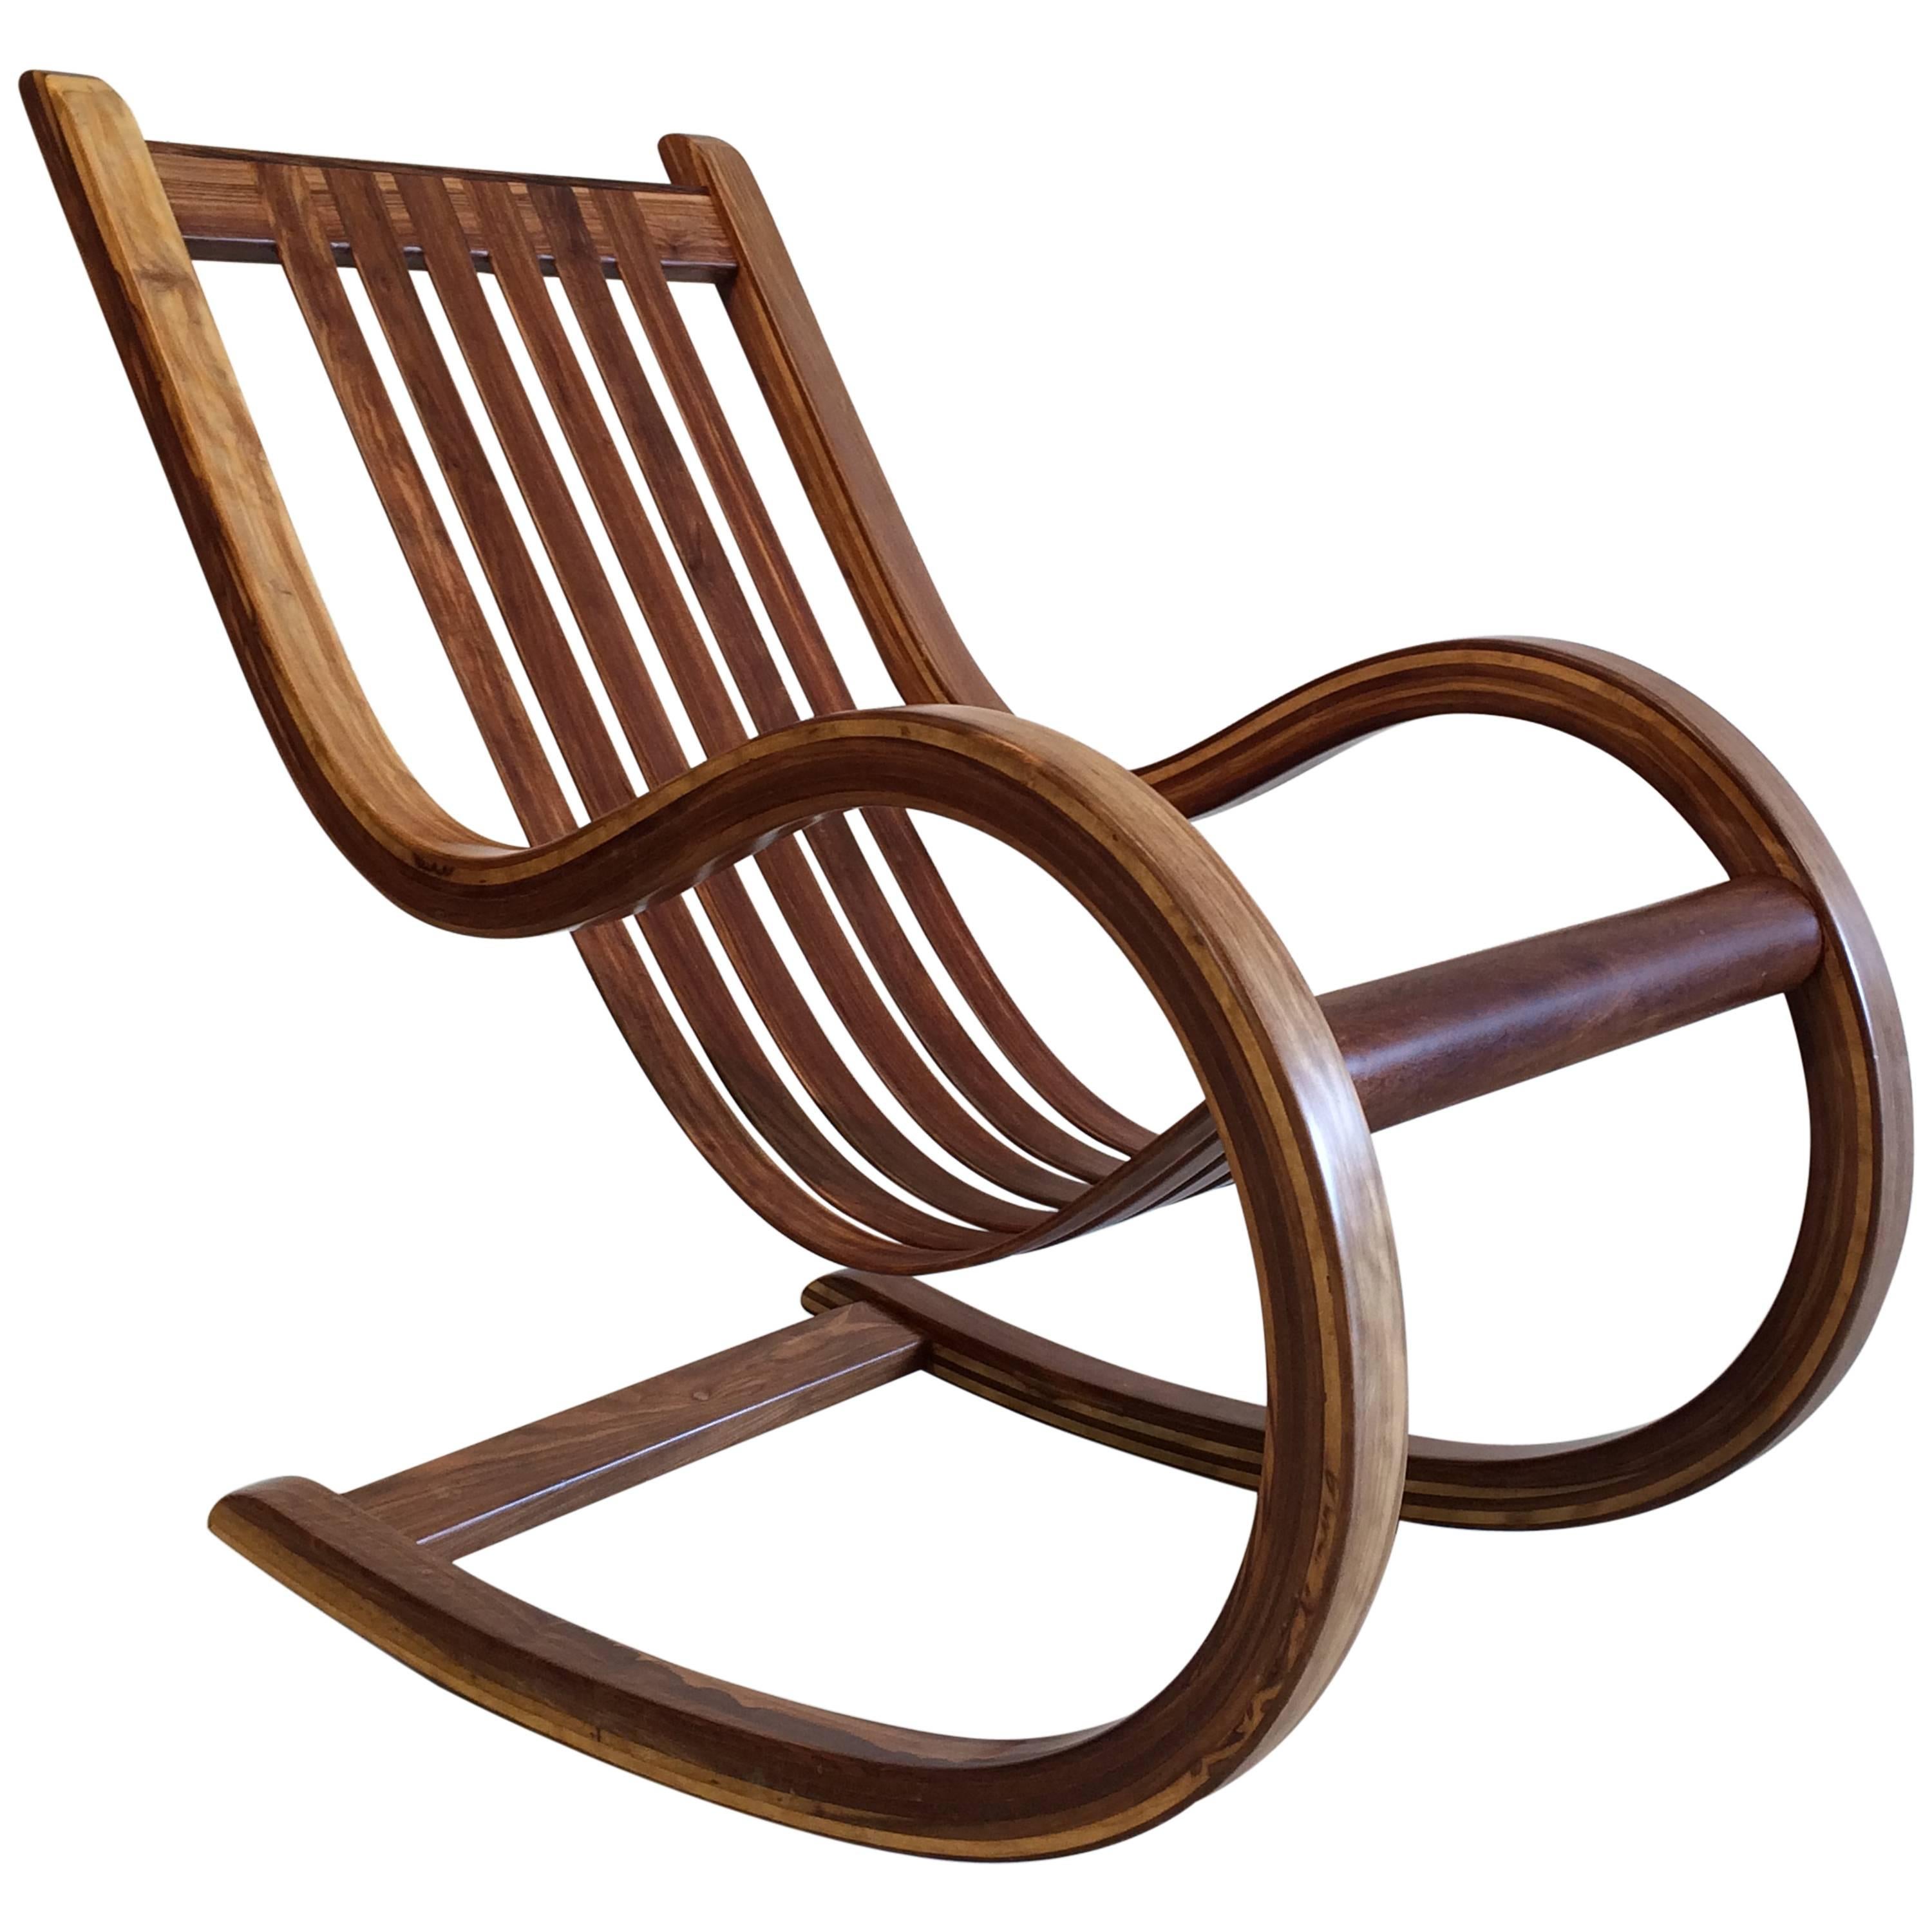 Studio Crafted Rocking Chair, Mexico Rocker